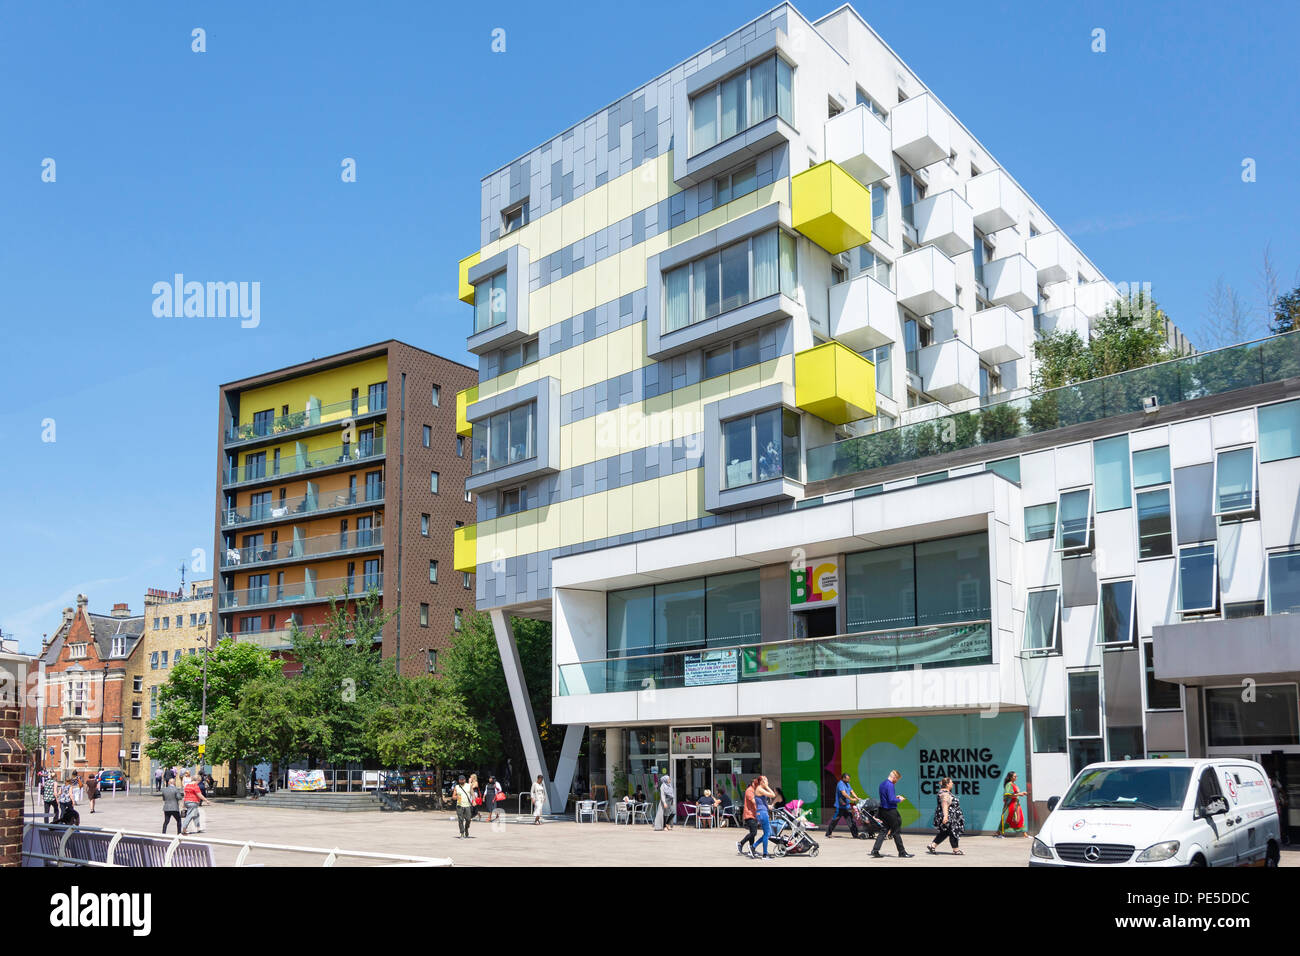 Central housing development and Barking Learning Centre, Town Hall Square, Barking, London Borough of Barking, Greater London, England, United Kingdom Stock Photo